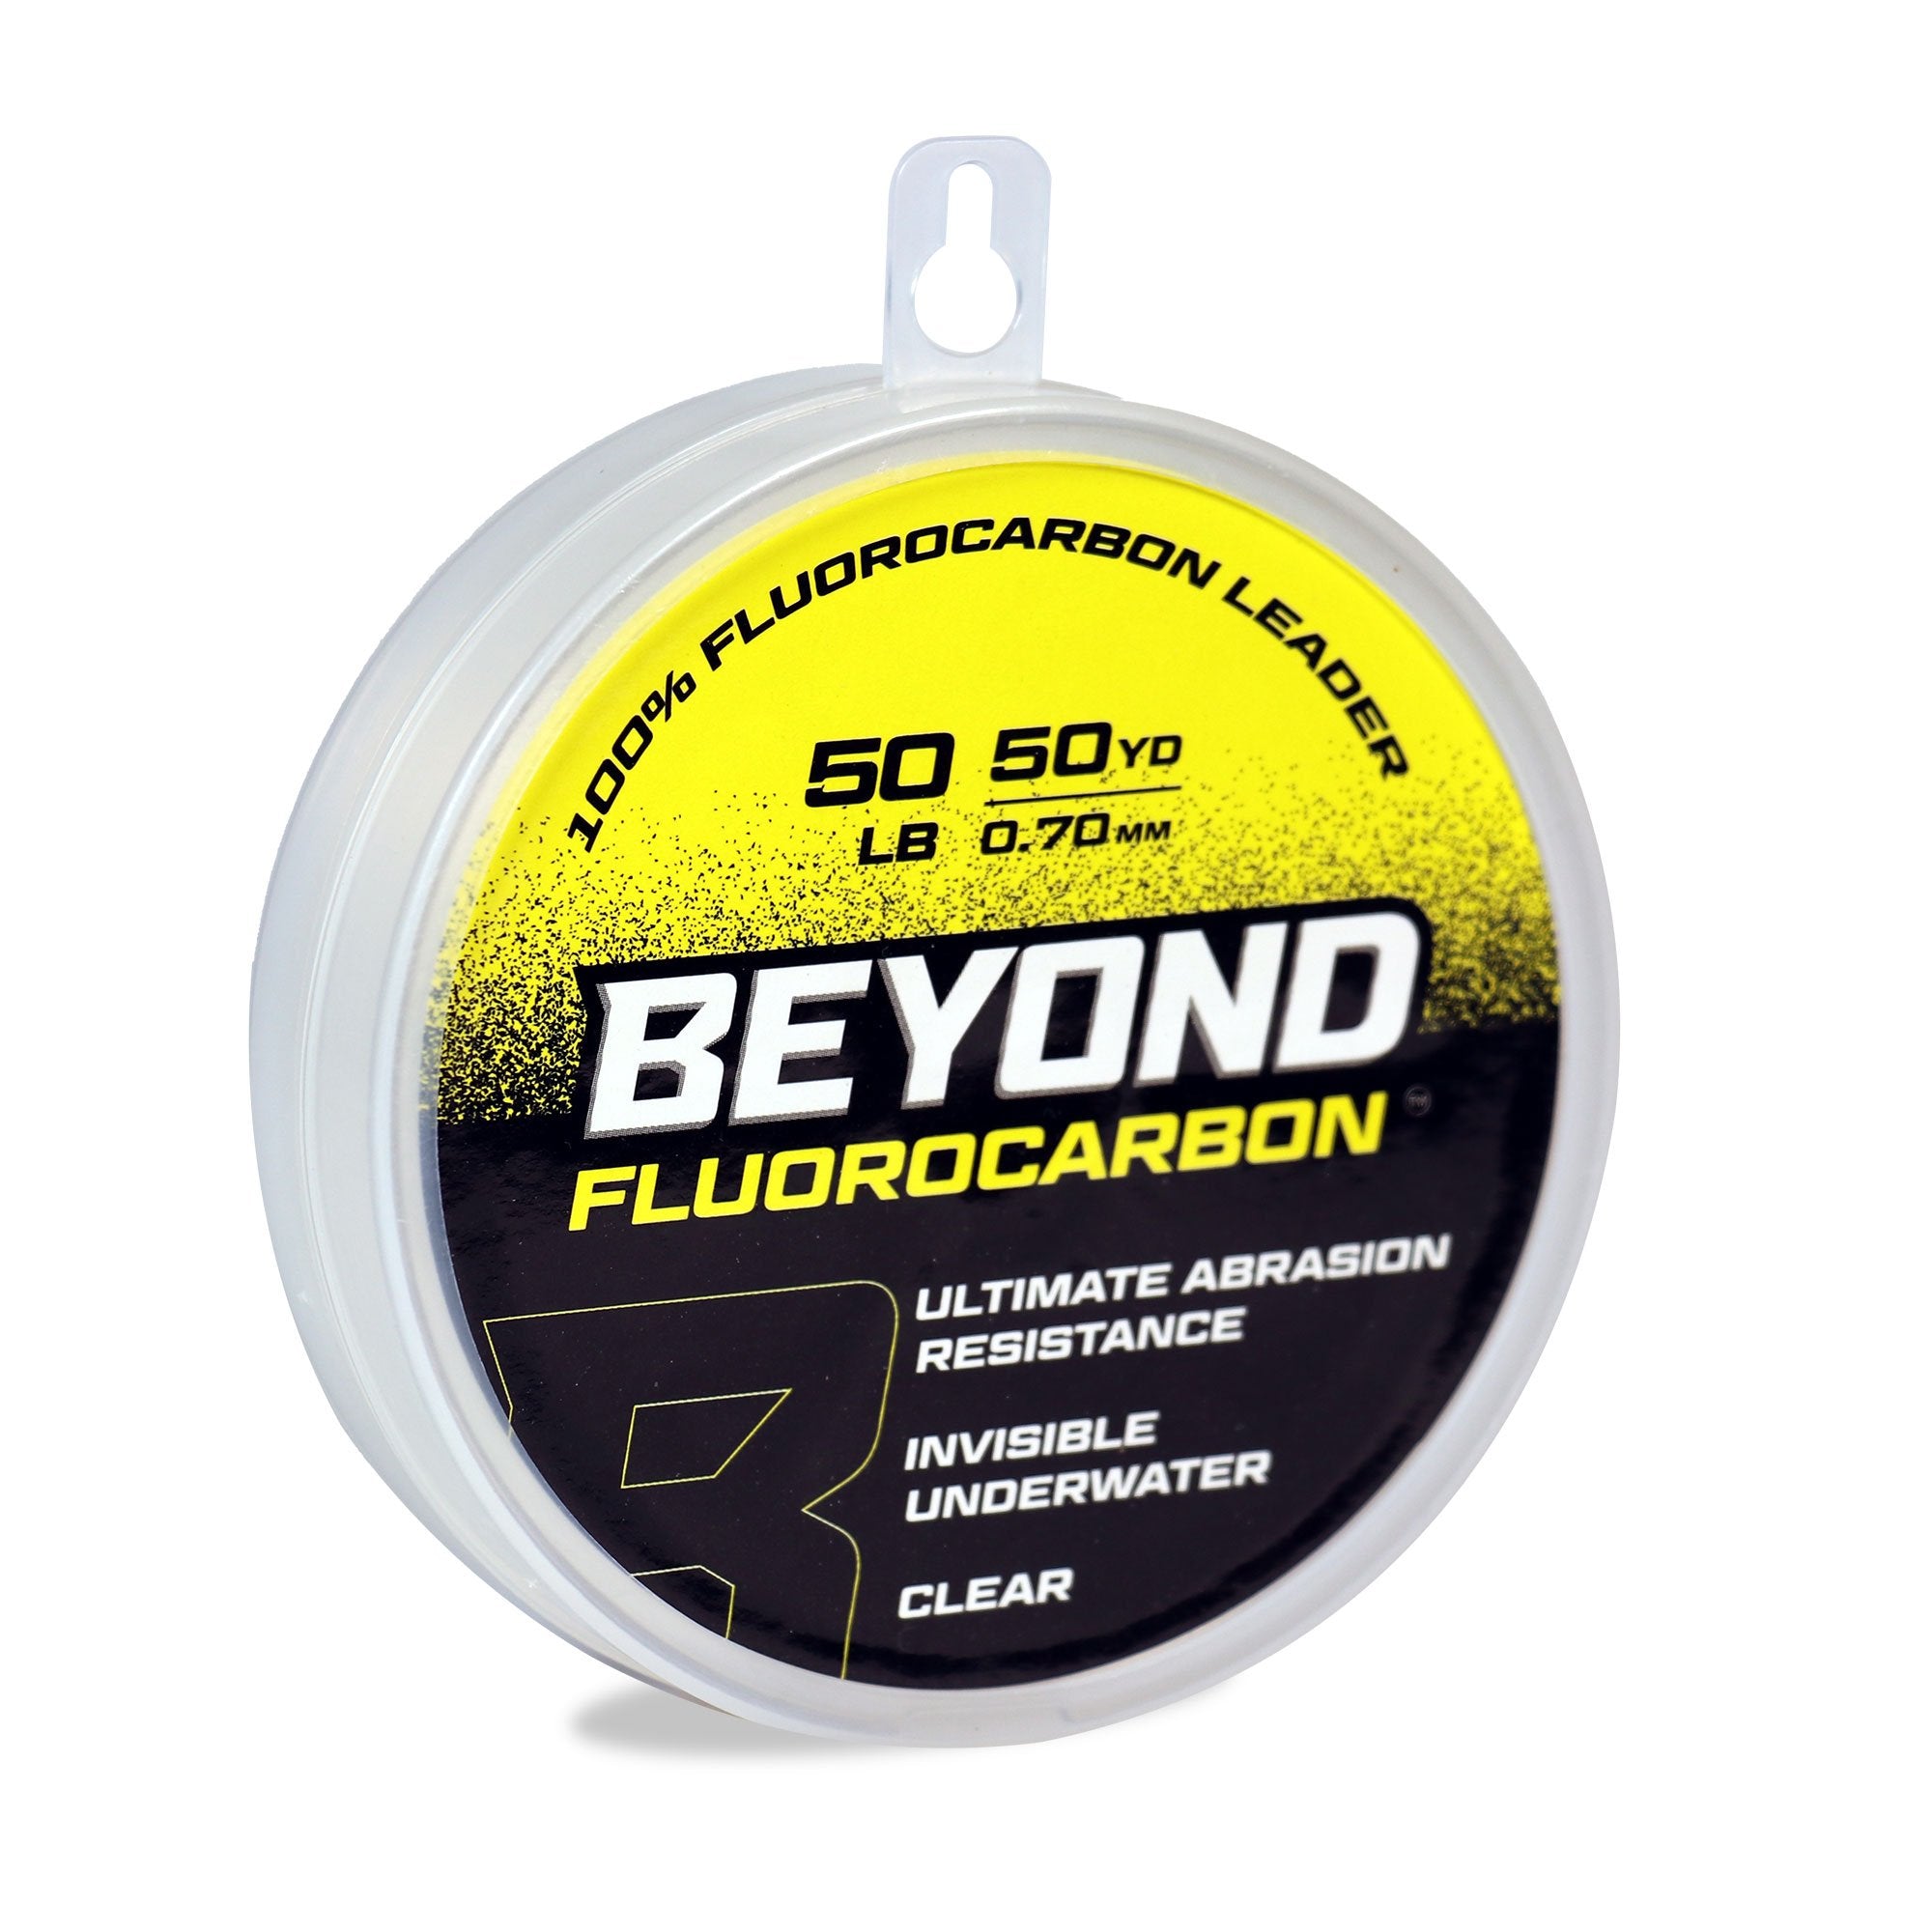 Beyond Fluorocarbon Leader Material - Clear - 40 lb. Test